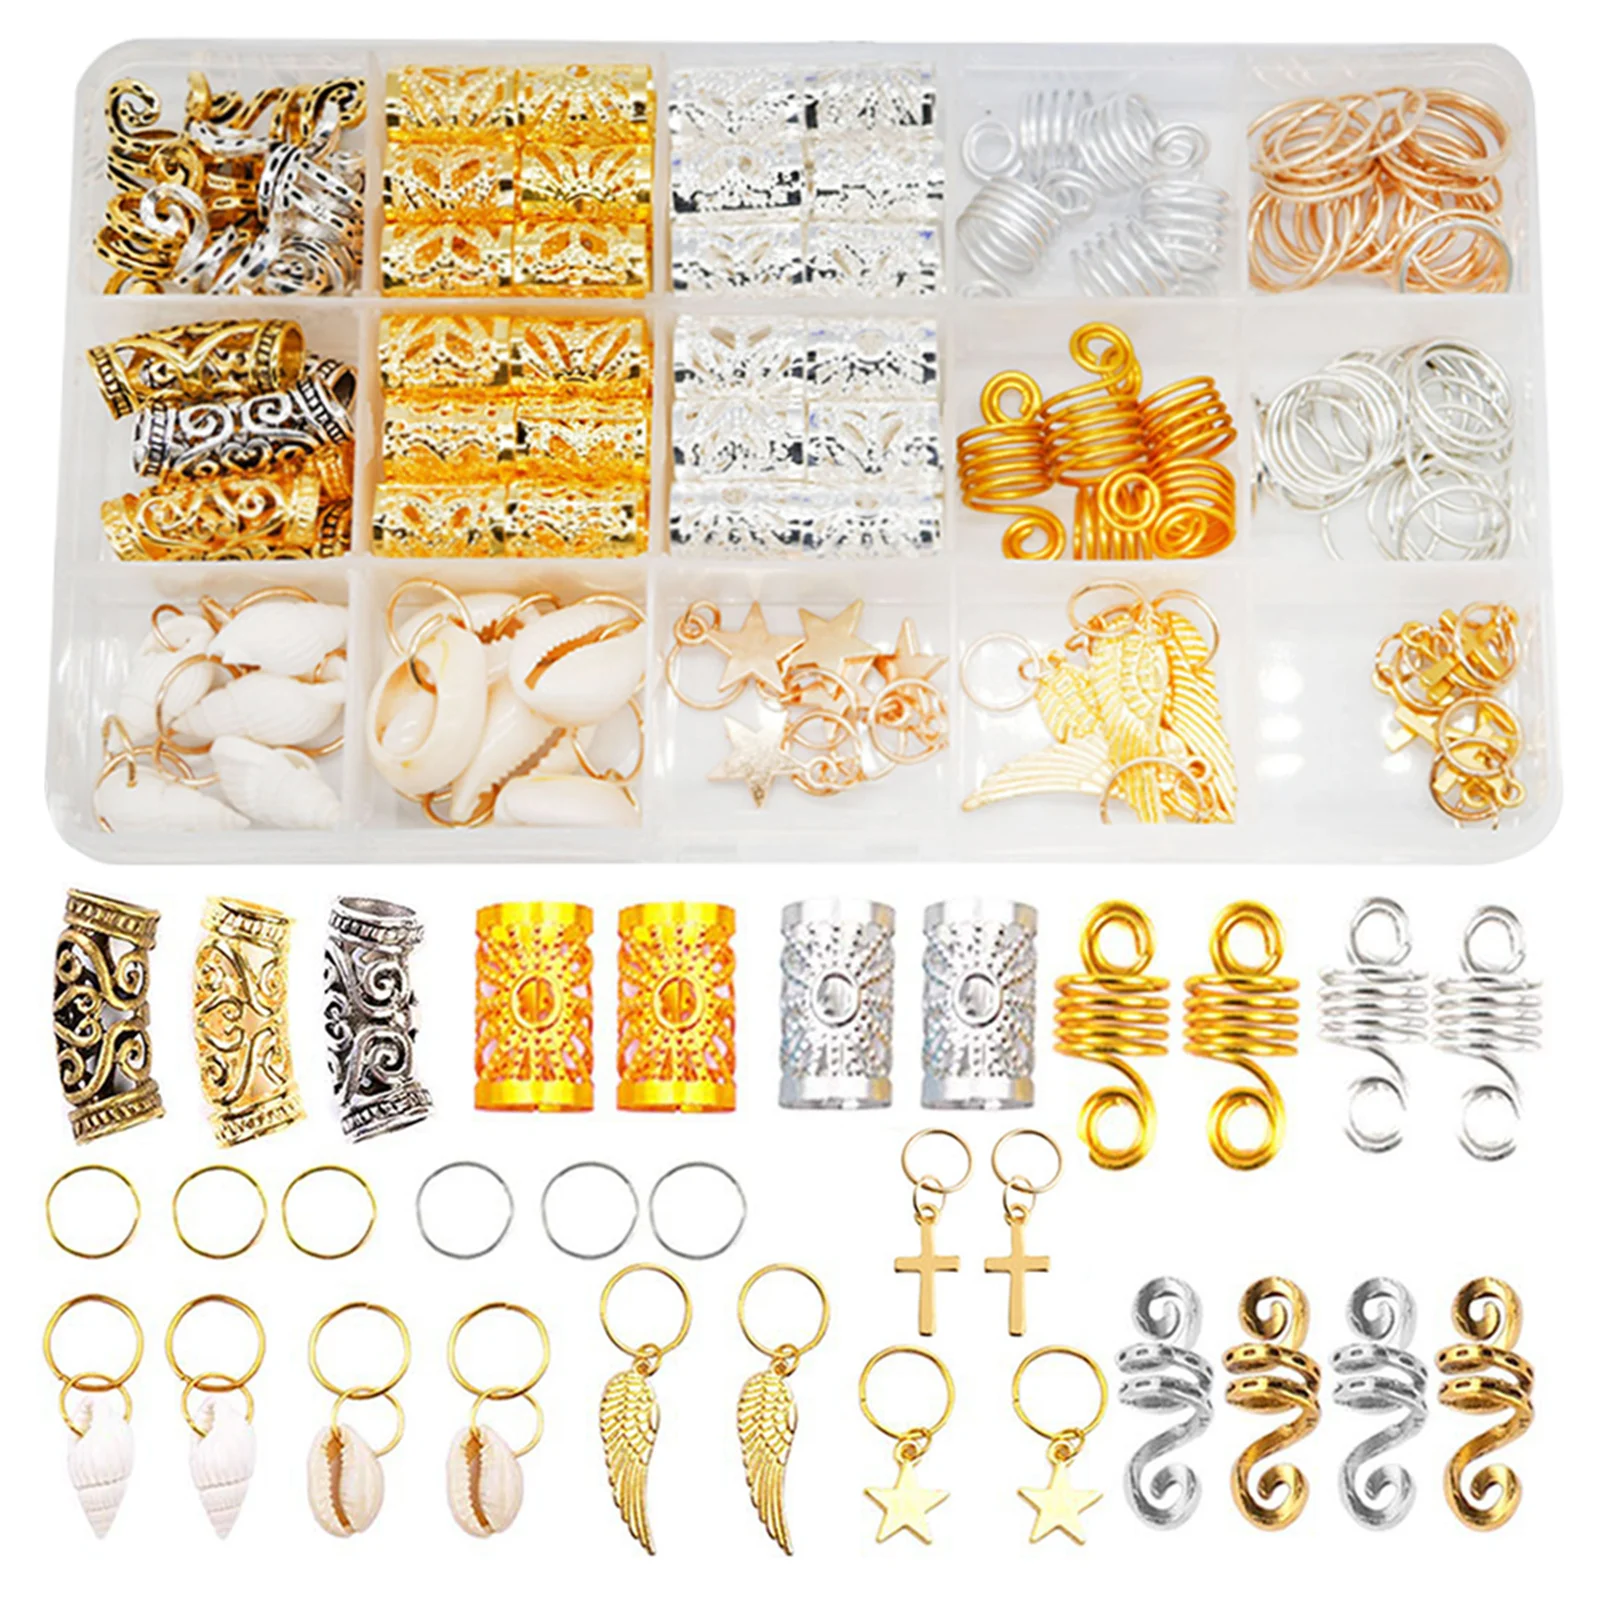 

160pcs/set Dreadlocks Accessories Lightweight Gift Alloy Cuffs Rings Clips With Storage Box Spool Coils Hair Jewelry For Braids